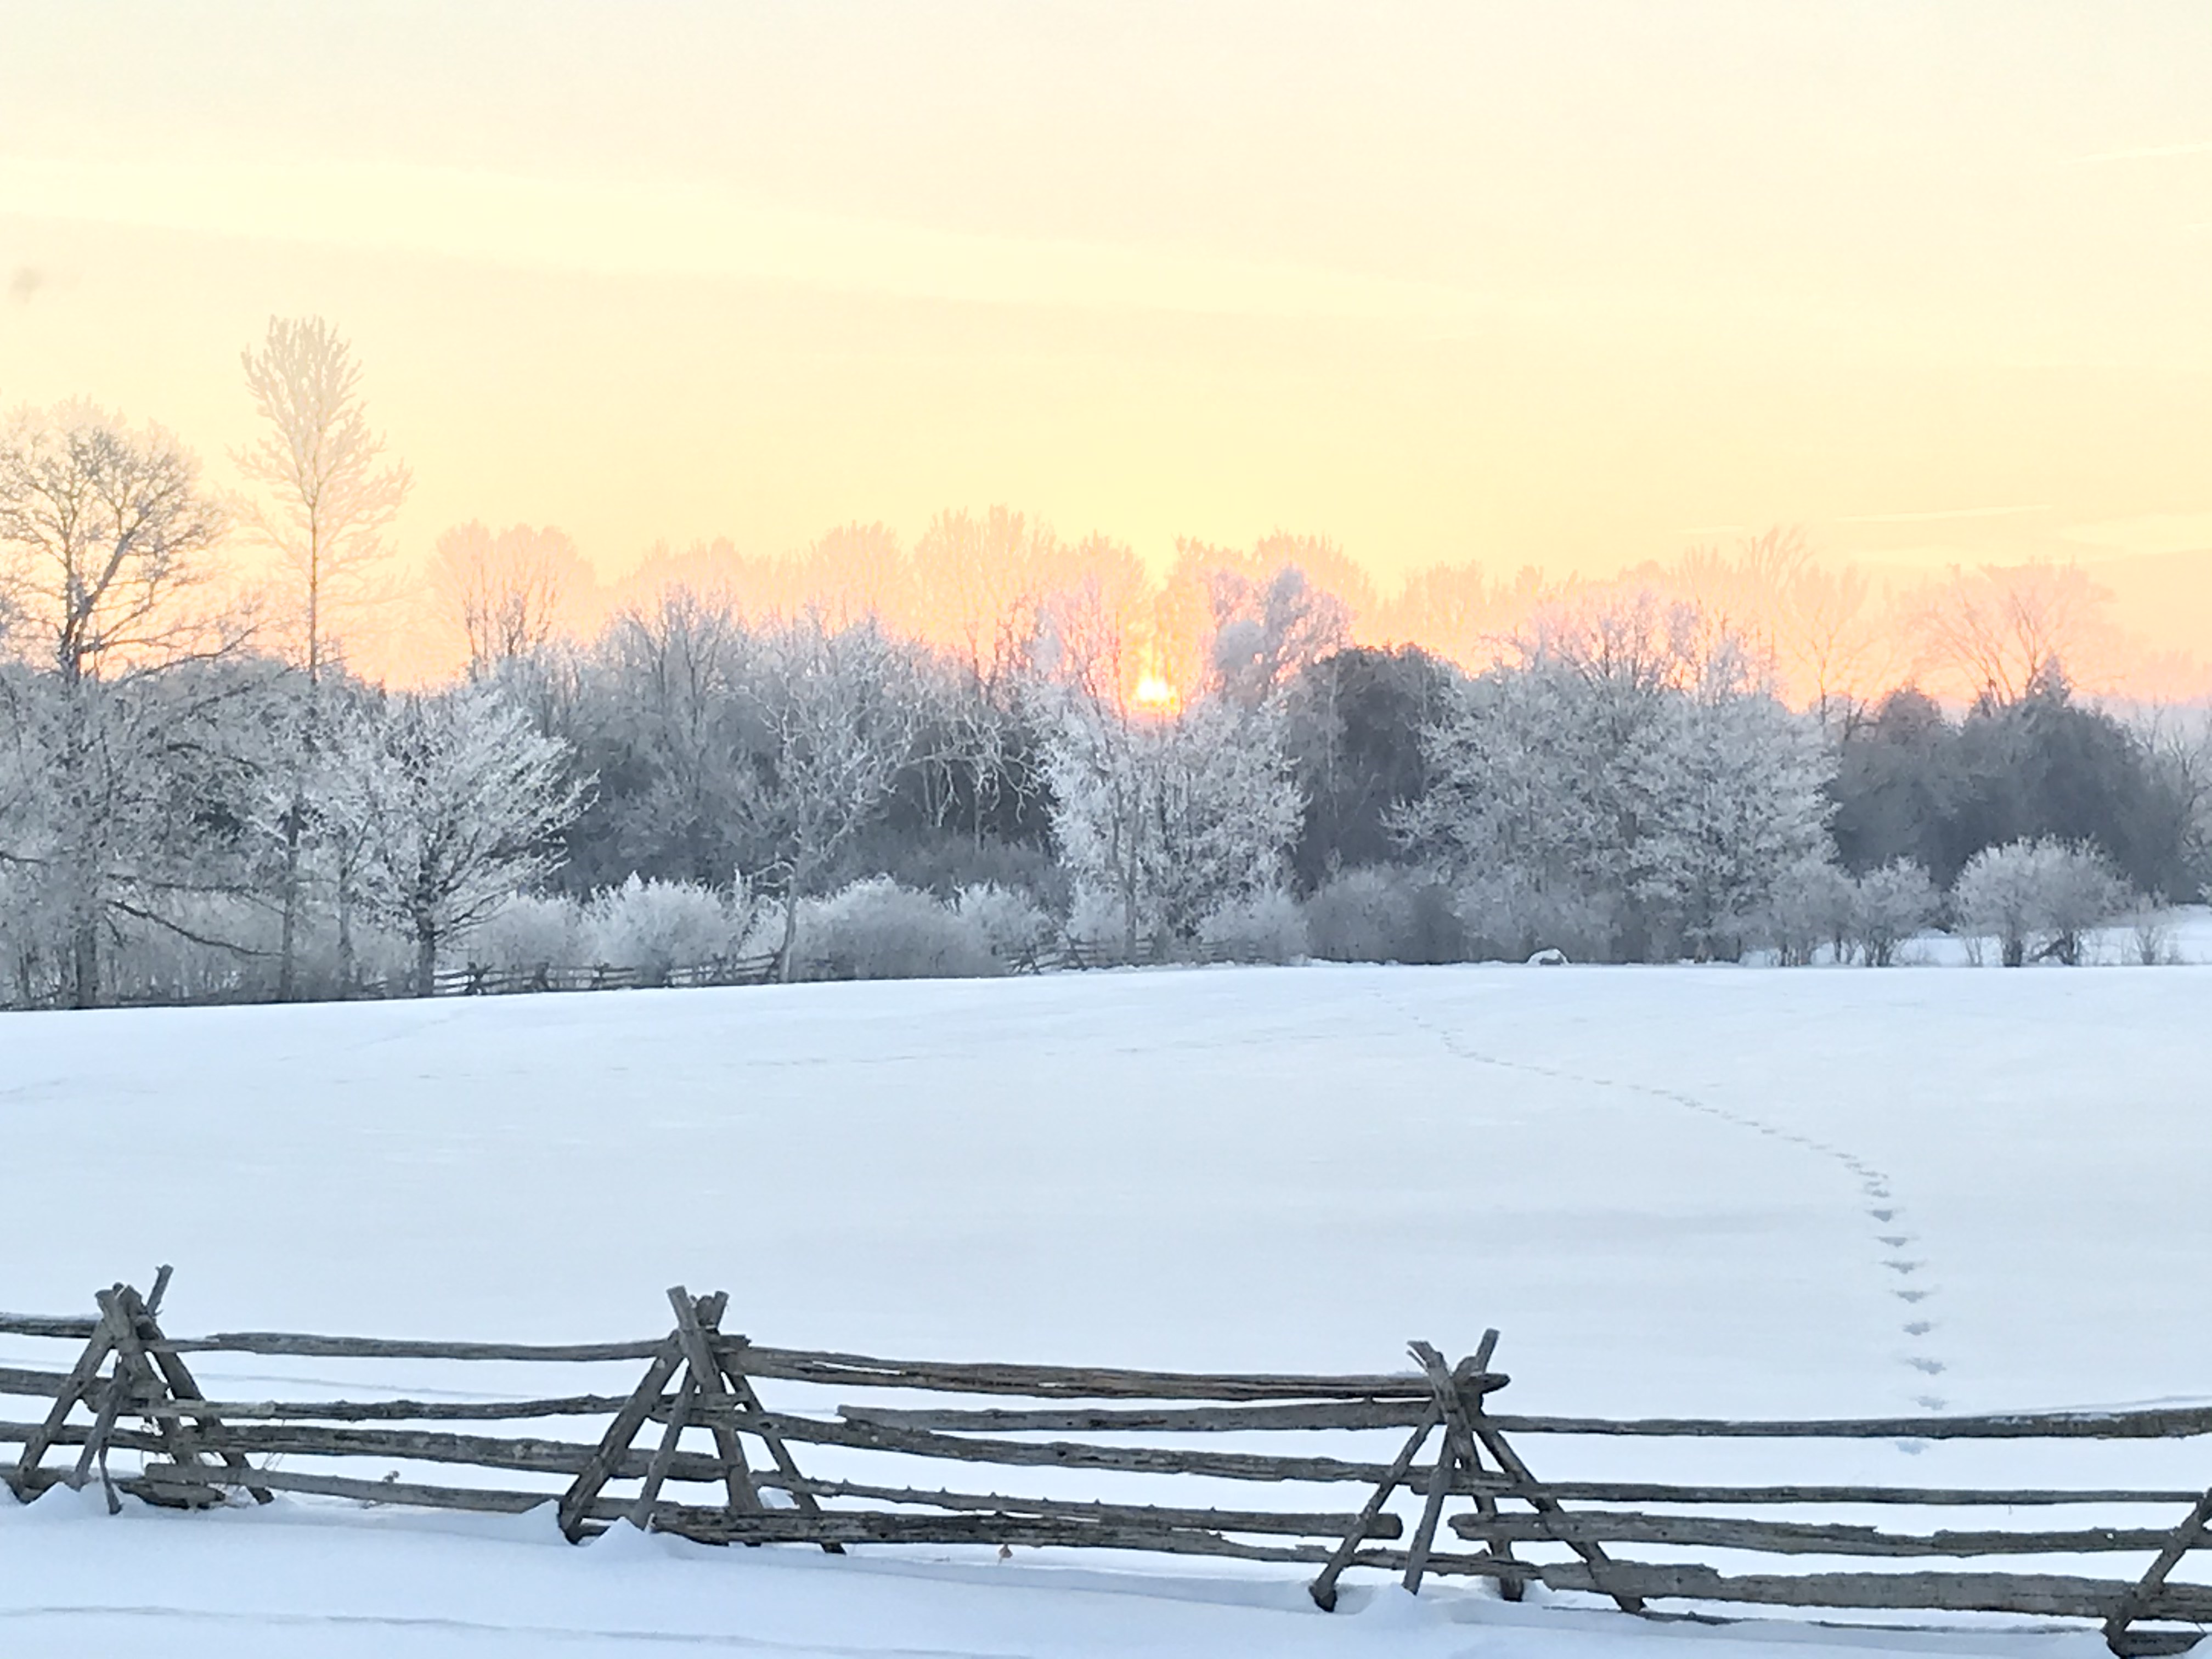 Submission 1 Snowy Field Sunset Lay DC 10A